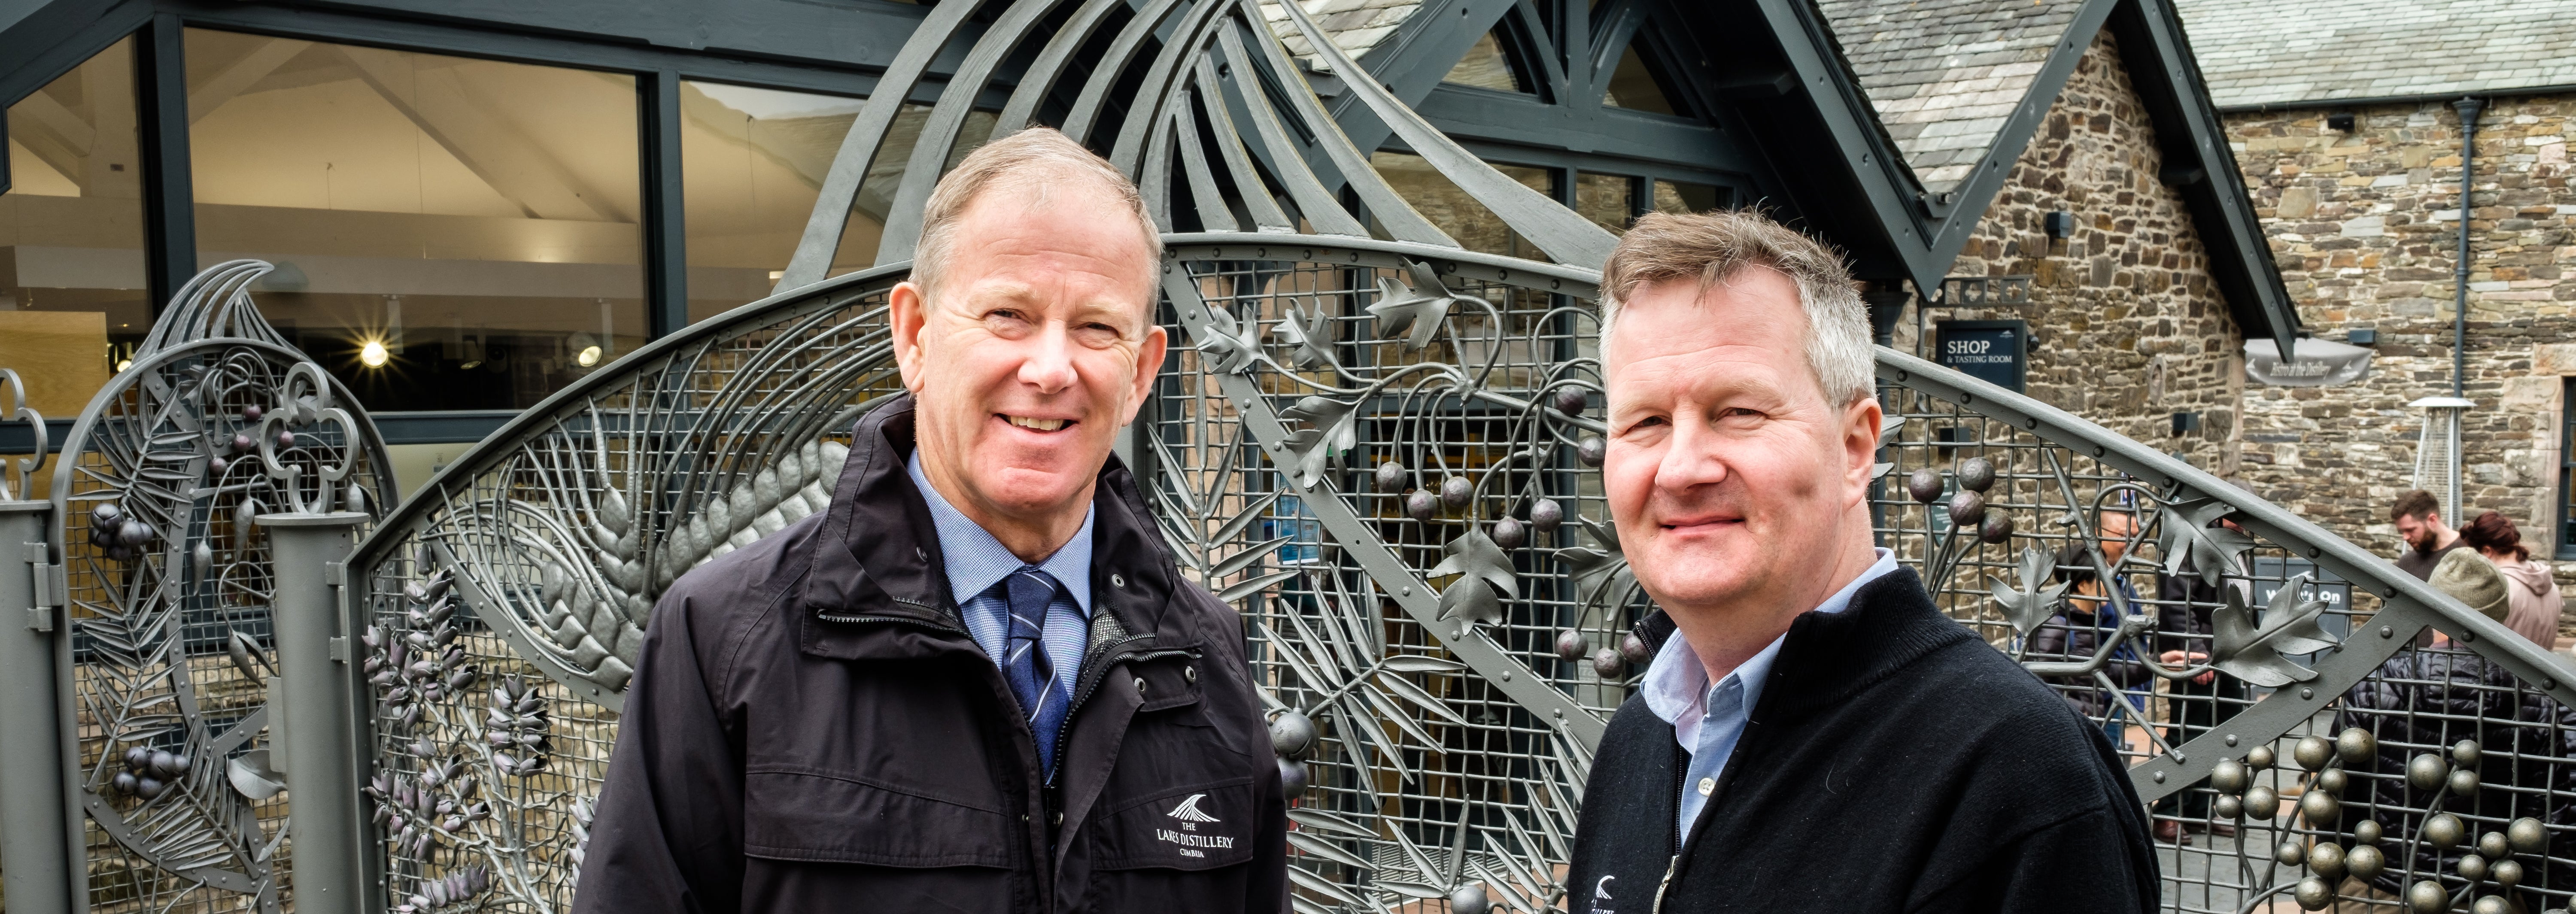 Nigel Mills and Paul Currie, The Lakes Distillery